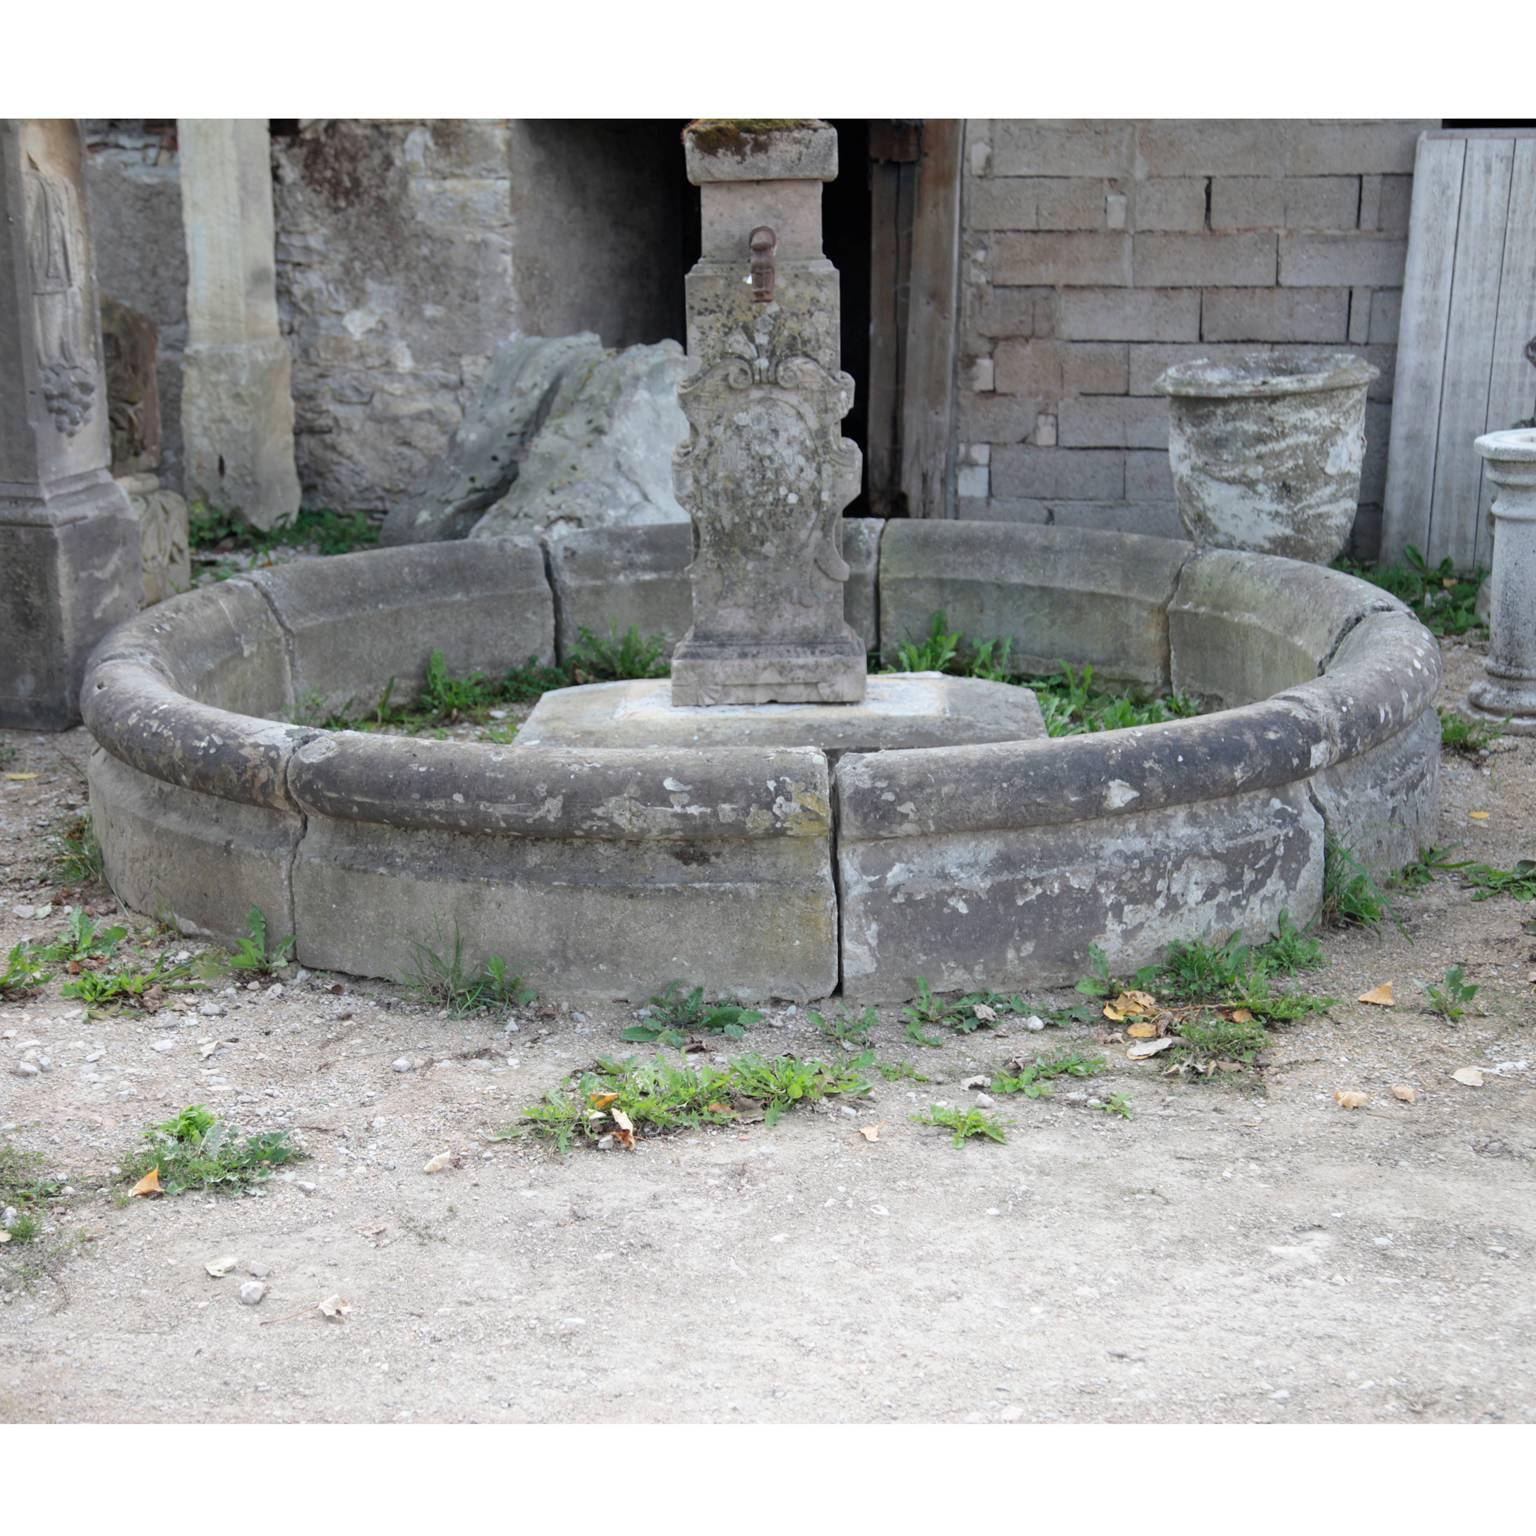 German (Saxony) sandstone fountain basin from the 18th century. The basin consists of segments and has smooth walls.